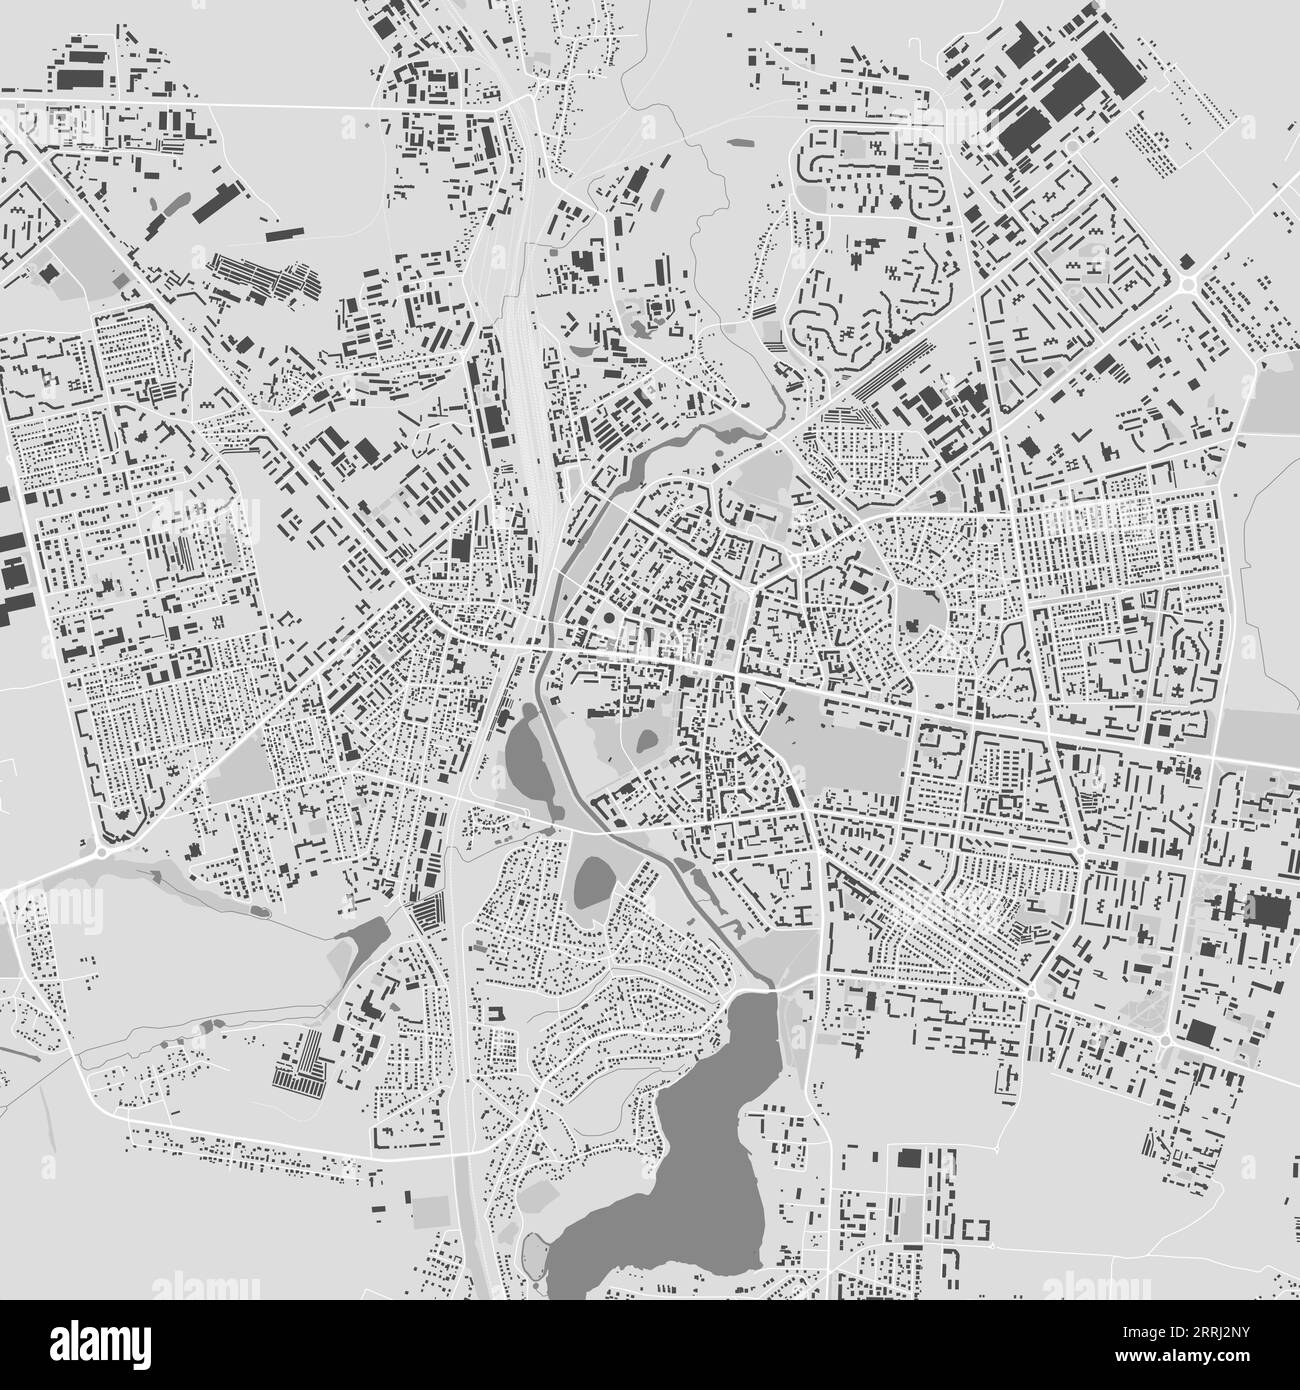 Map of Rivne city, Ukraine. Urban black and white poster. Road map image with metropolitan city area view. Stock Vector